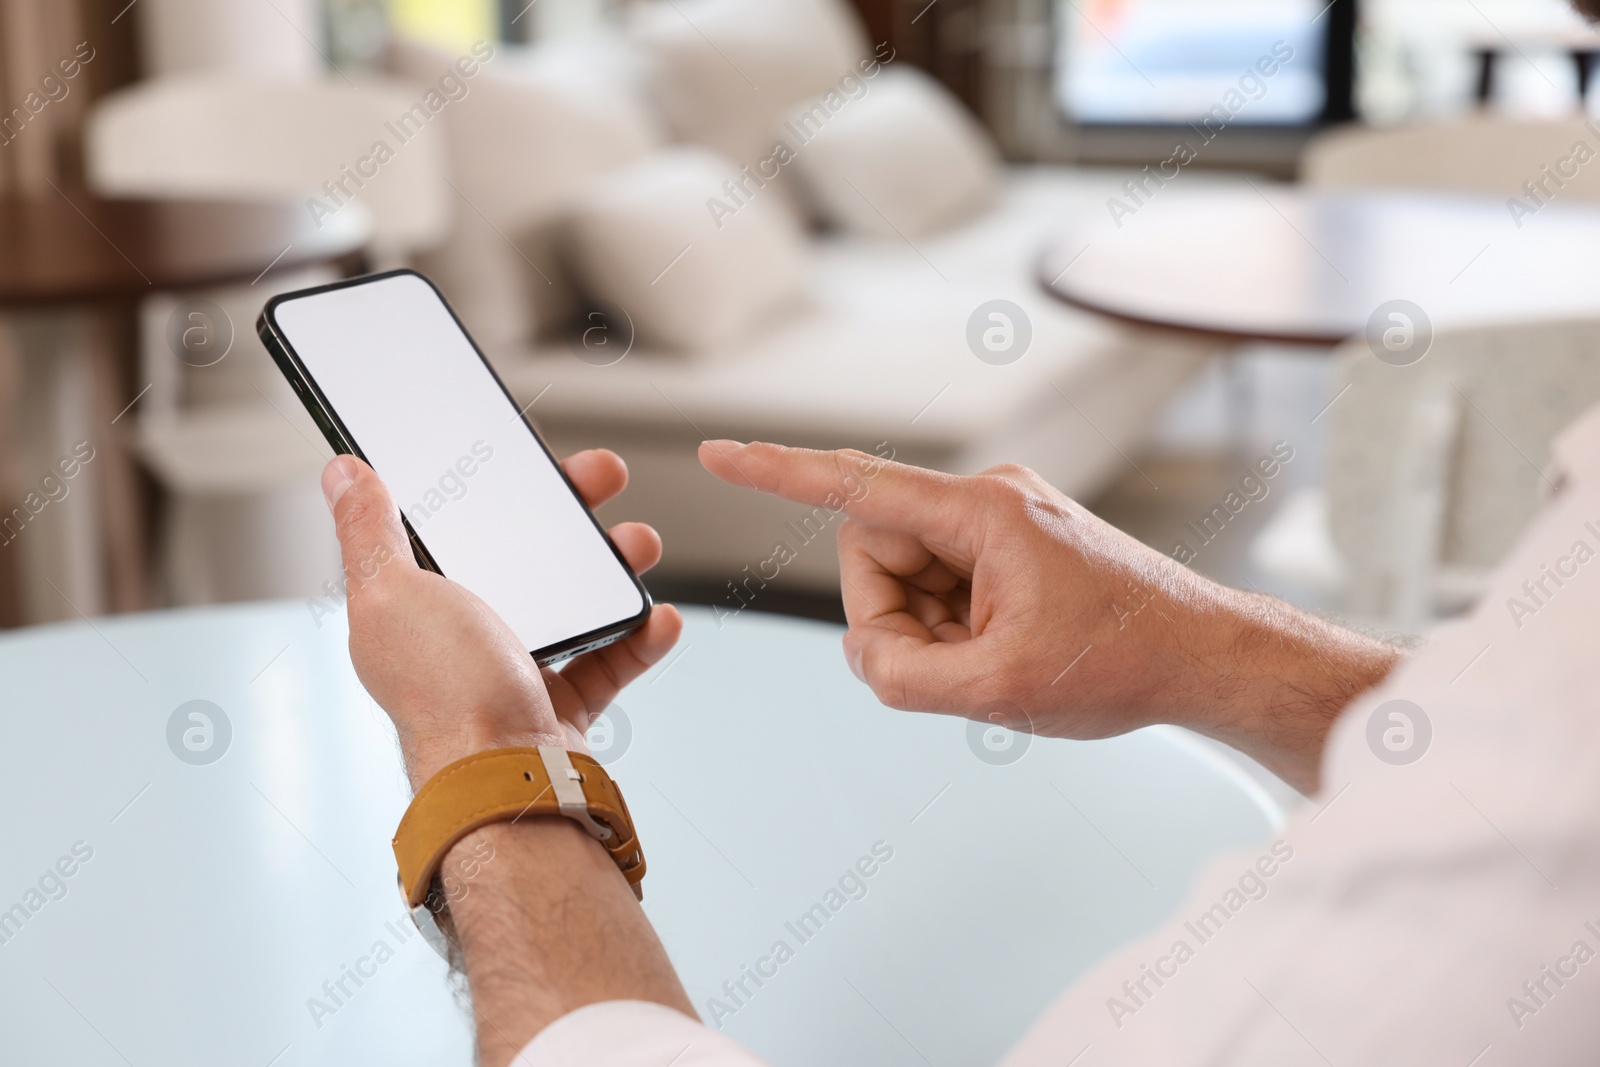 Photo of Man using mobile phone at table indoors, closeup